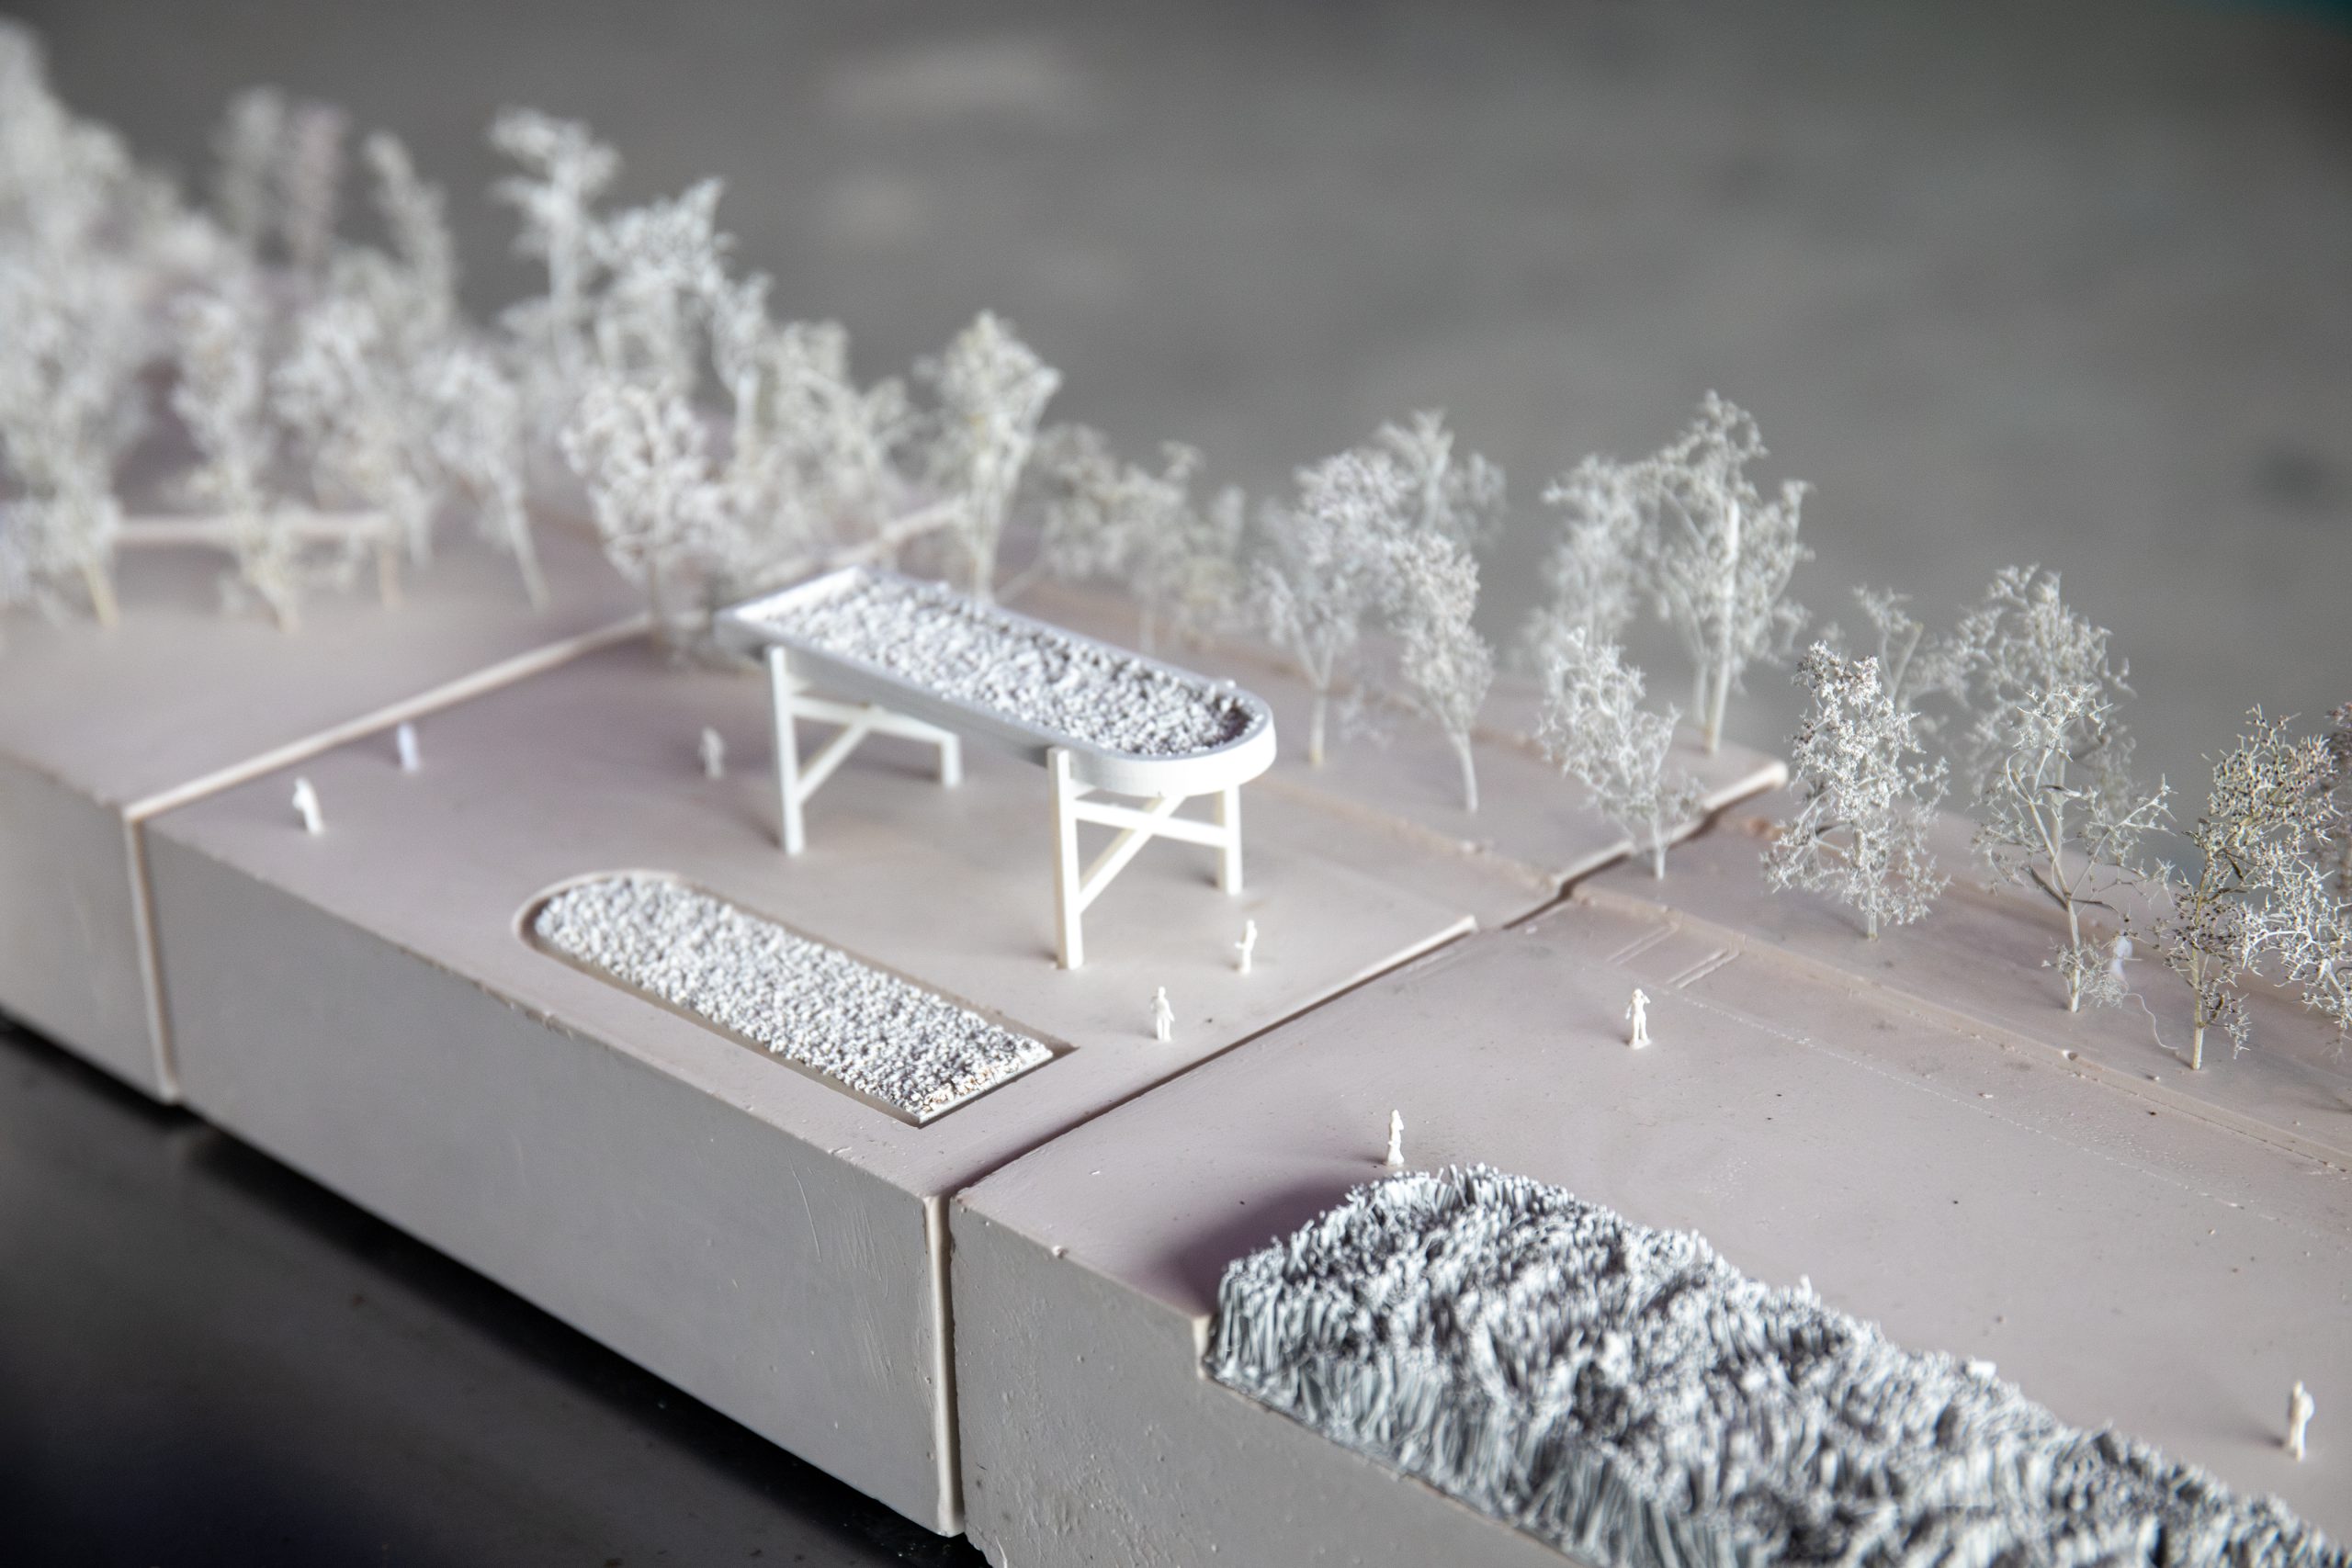 A close up photo of a white architectural model of what Ravenscraig could look like in the future, featuring model trees and people.